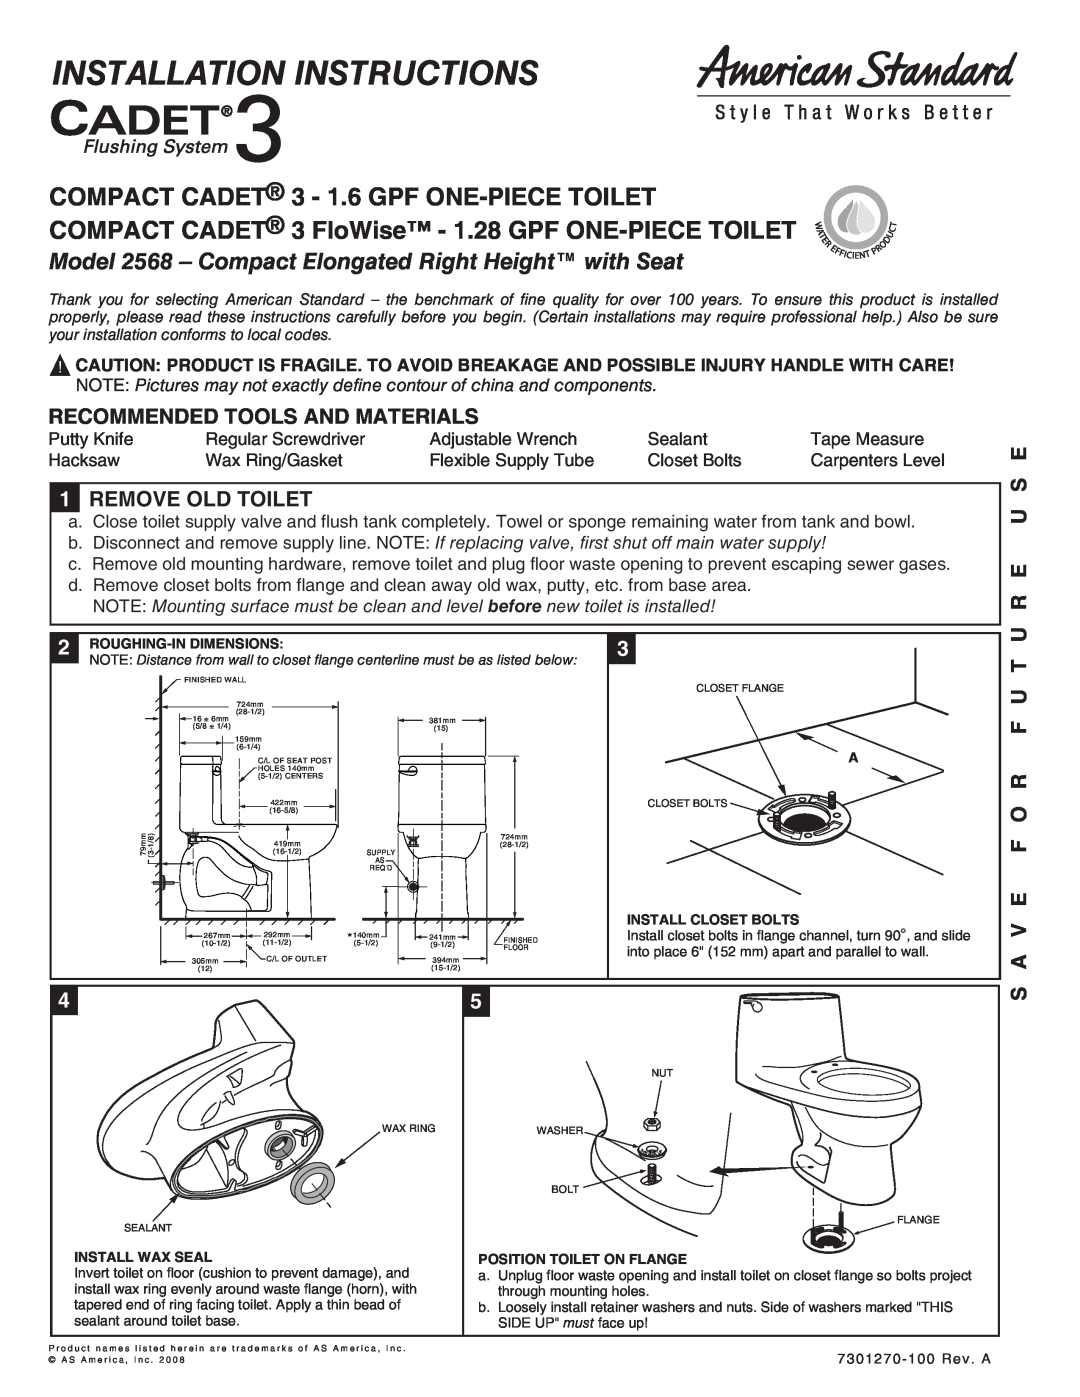 American Standard 2907, 2568 installation instructions Recommended Tools And Materials, 1REMOVE OLD TOILET, T U R E U S E 